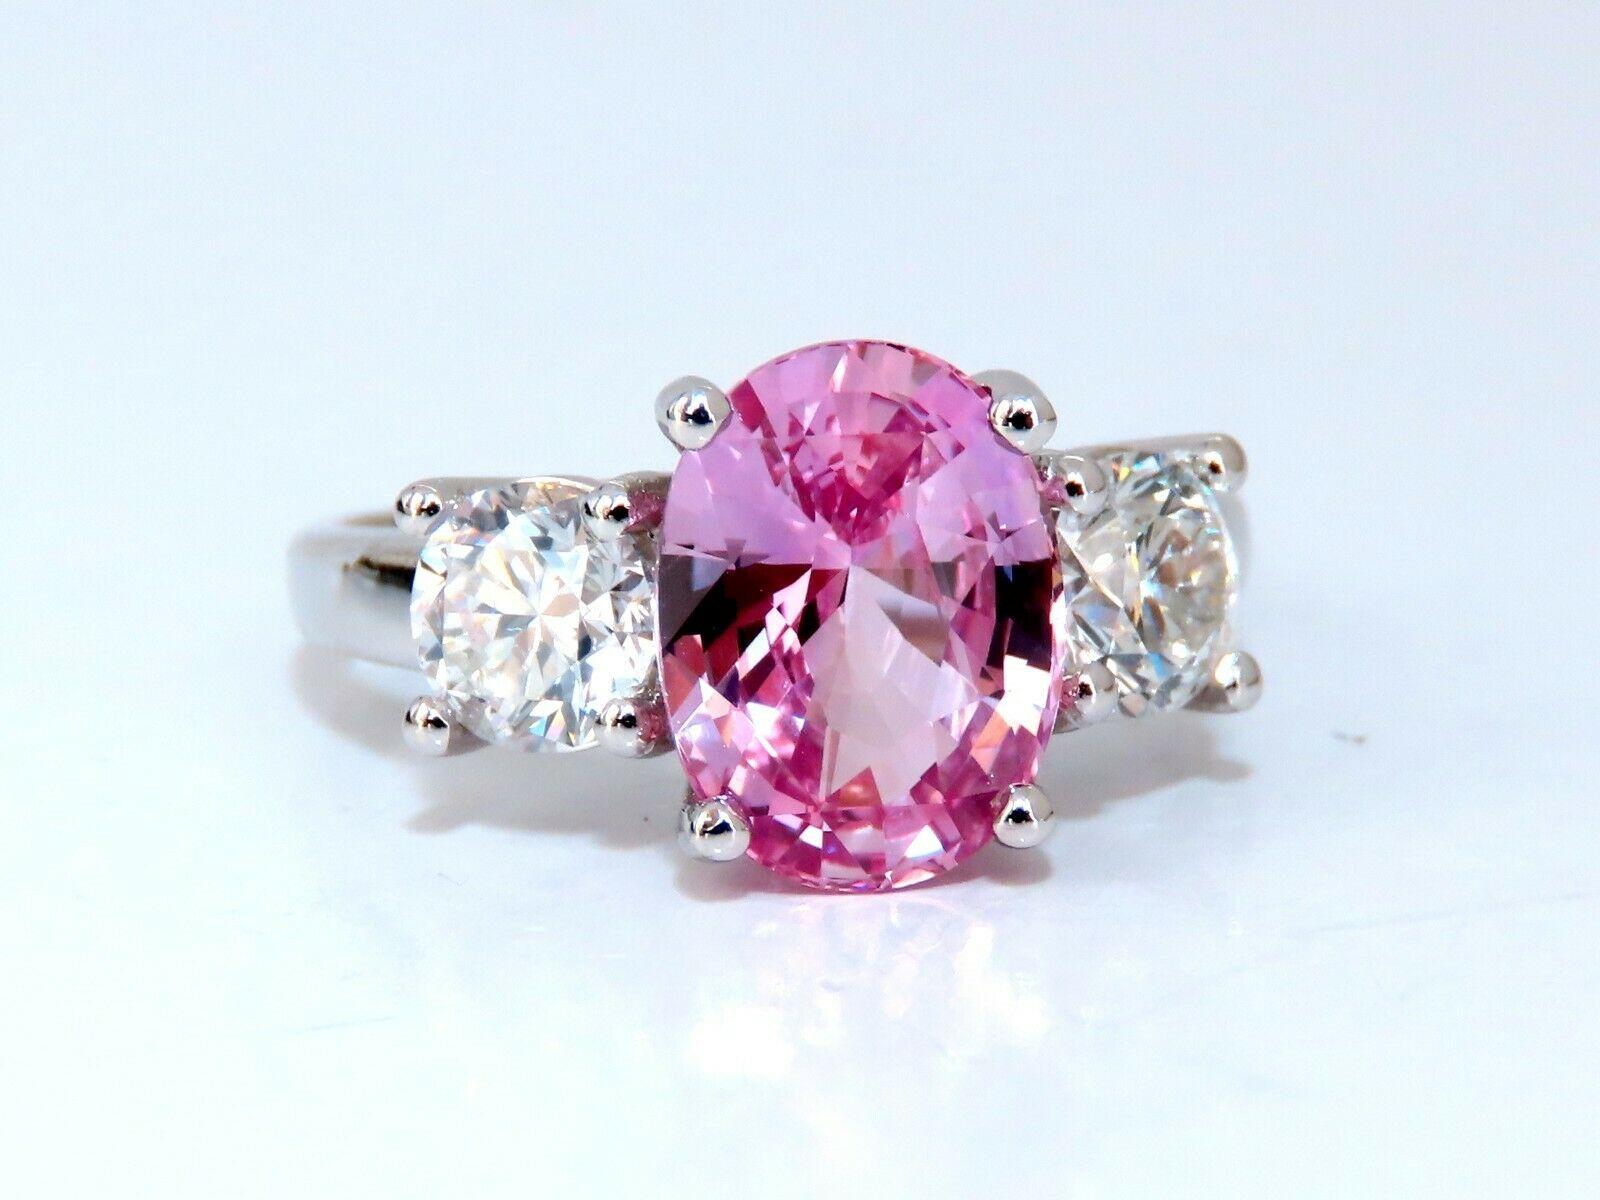 Classic Three Anniversary 

3.66ct. Natural GIA Certified Pink Sapphire Ring

GIA Certified Report ID: 5192270693

10.34 X 7.68 X 5.31mm

Full cut oval brilliant 

Clean Clarity & Transparent

1.02ct. (2) Round Diamonds 

H-color Si-1 clarity.

 